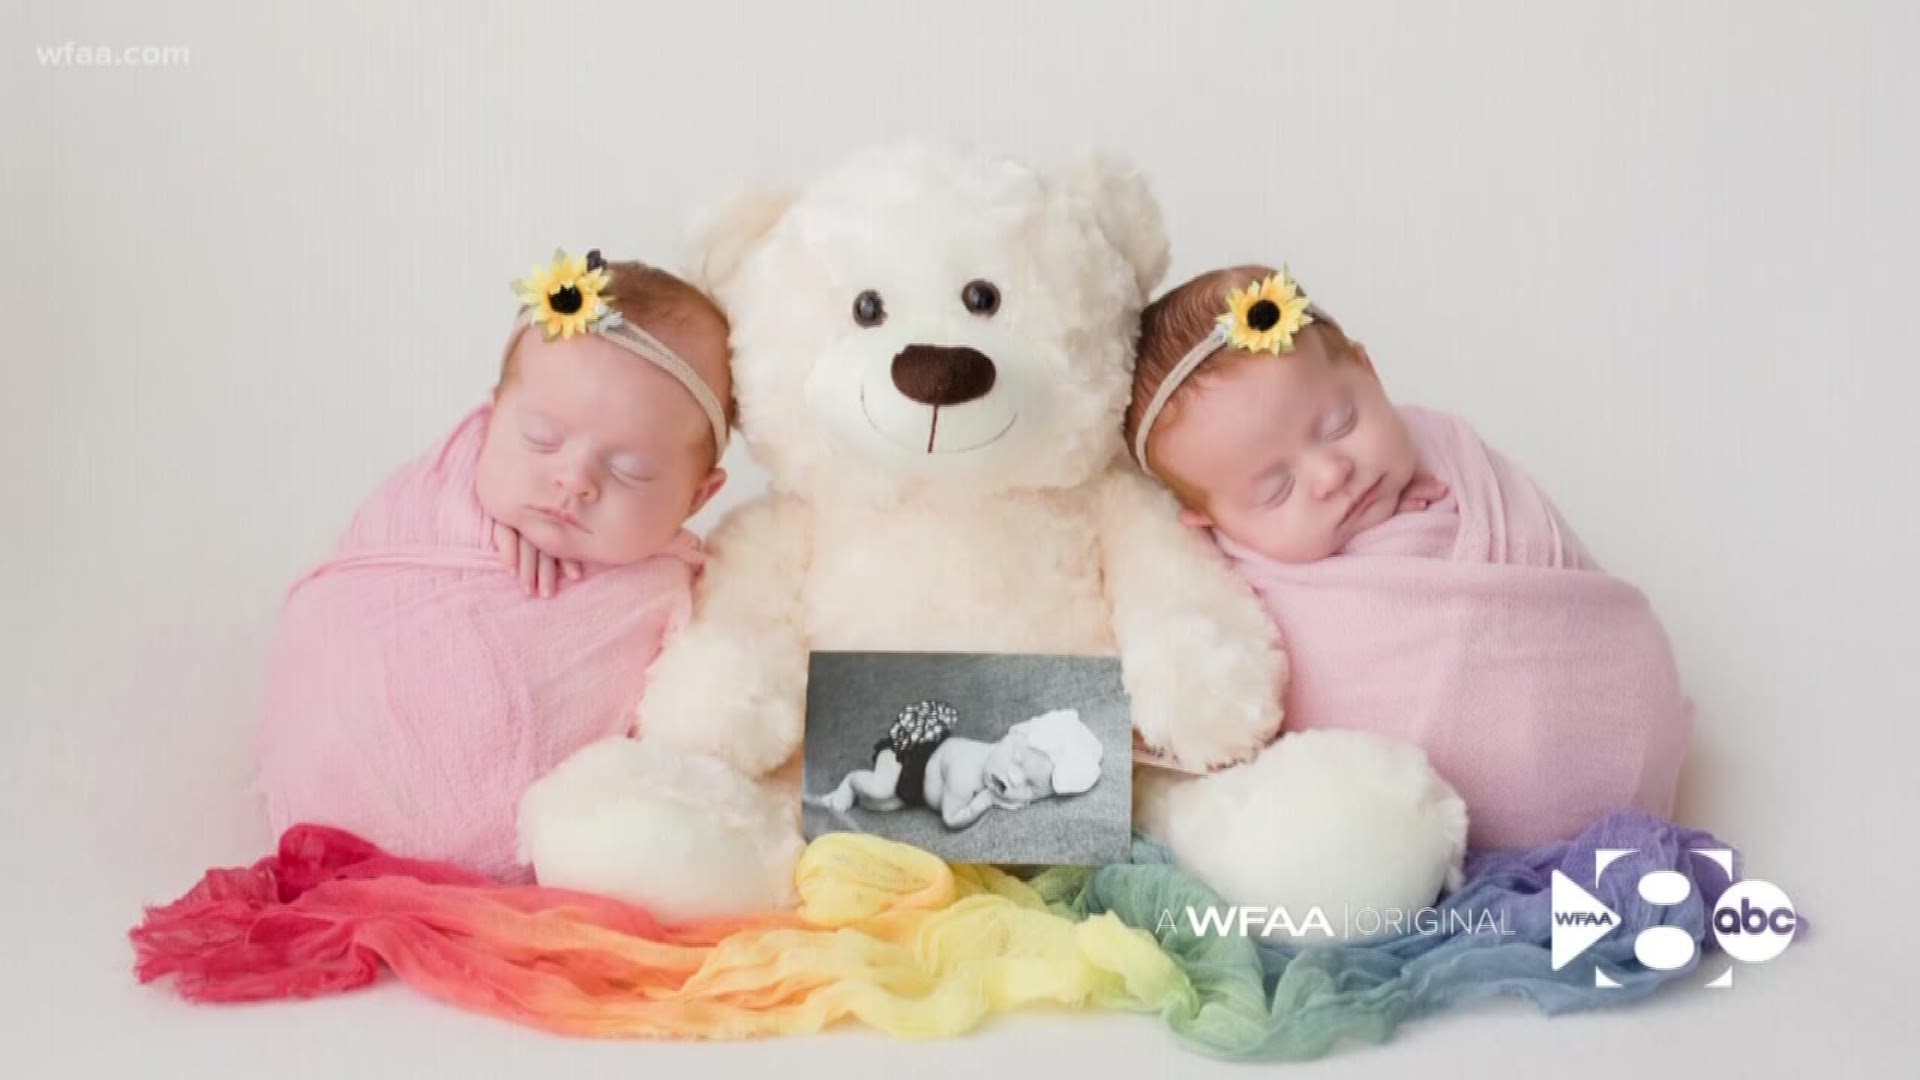 Rainbow babies: Families find hope, love after losing a baby